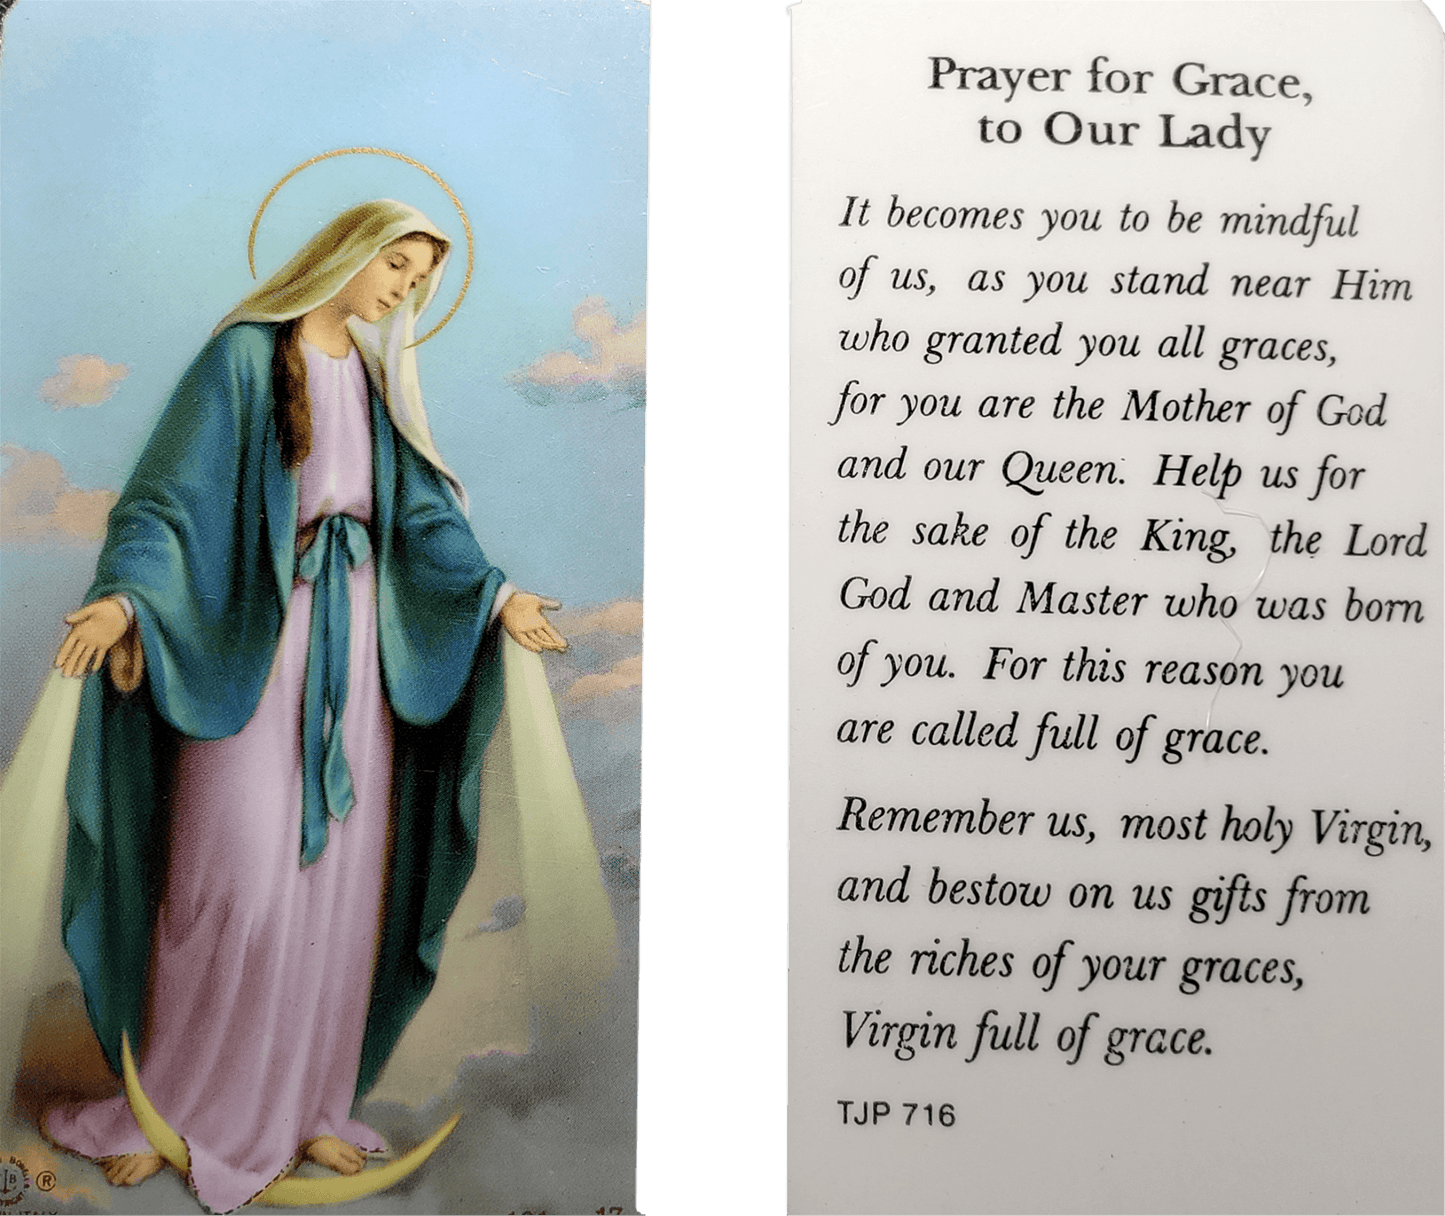 Prayer Card Prayer For Grace To Our Lady Laminated TJP716 - Ysleta Mission Gift Shop- VOTED El Paso's Best Gift Shop